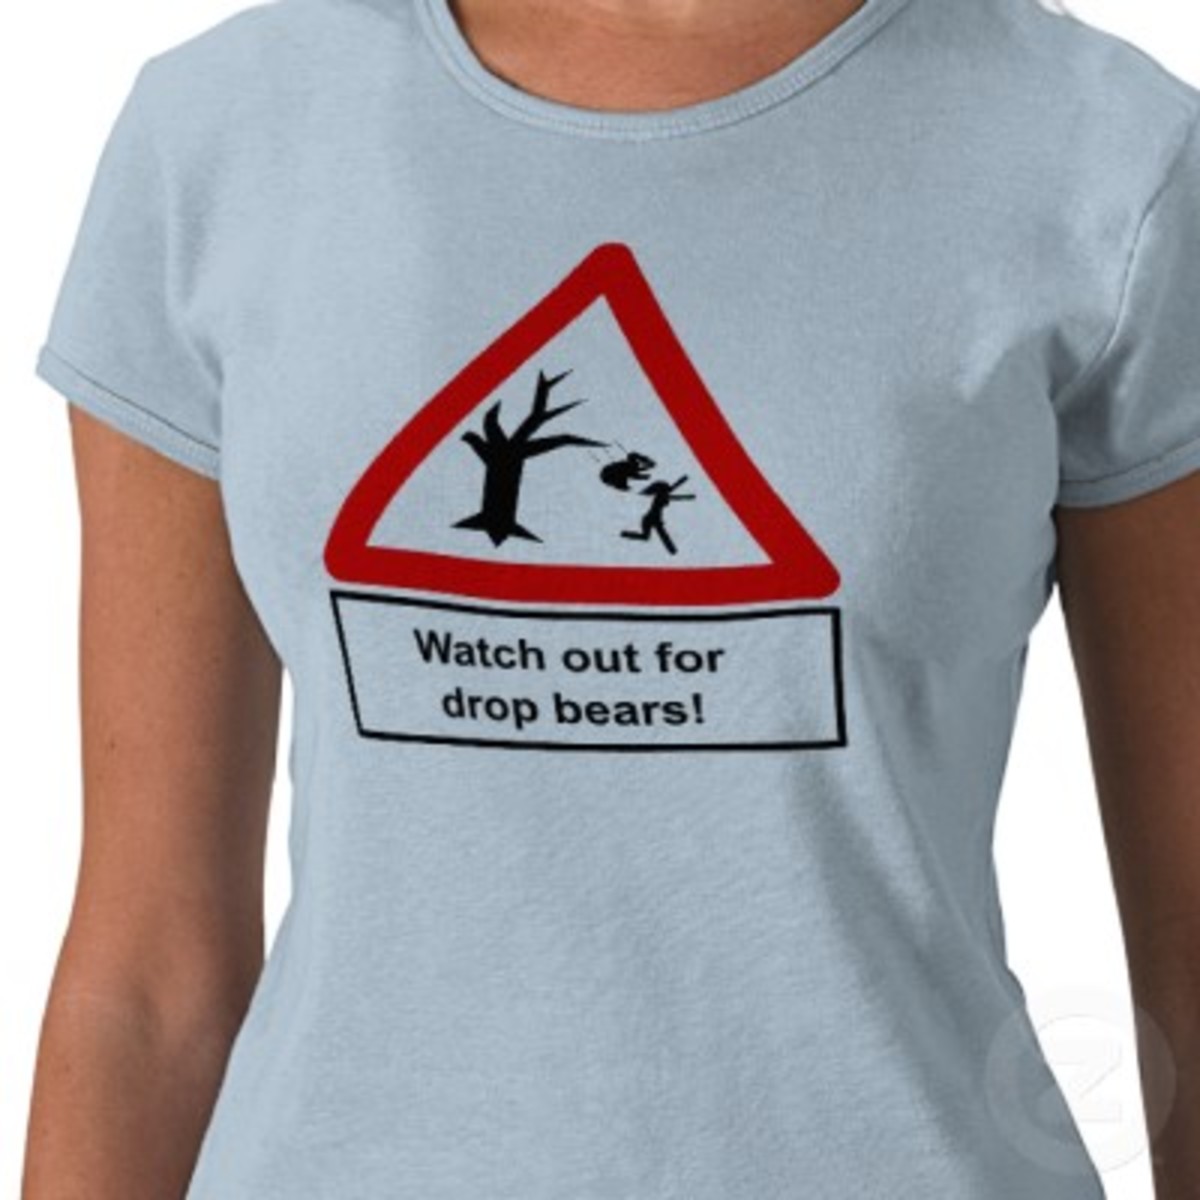 how-to-survive-a-drop-bear-attack-an-essential-guide-on-australias-most-dangerous-marsupial